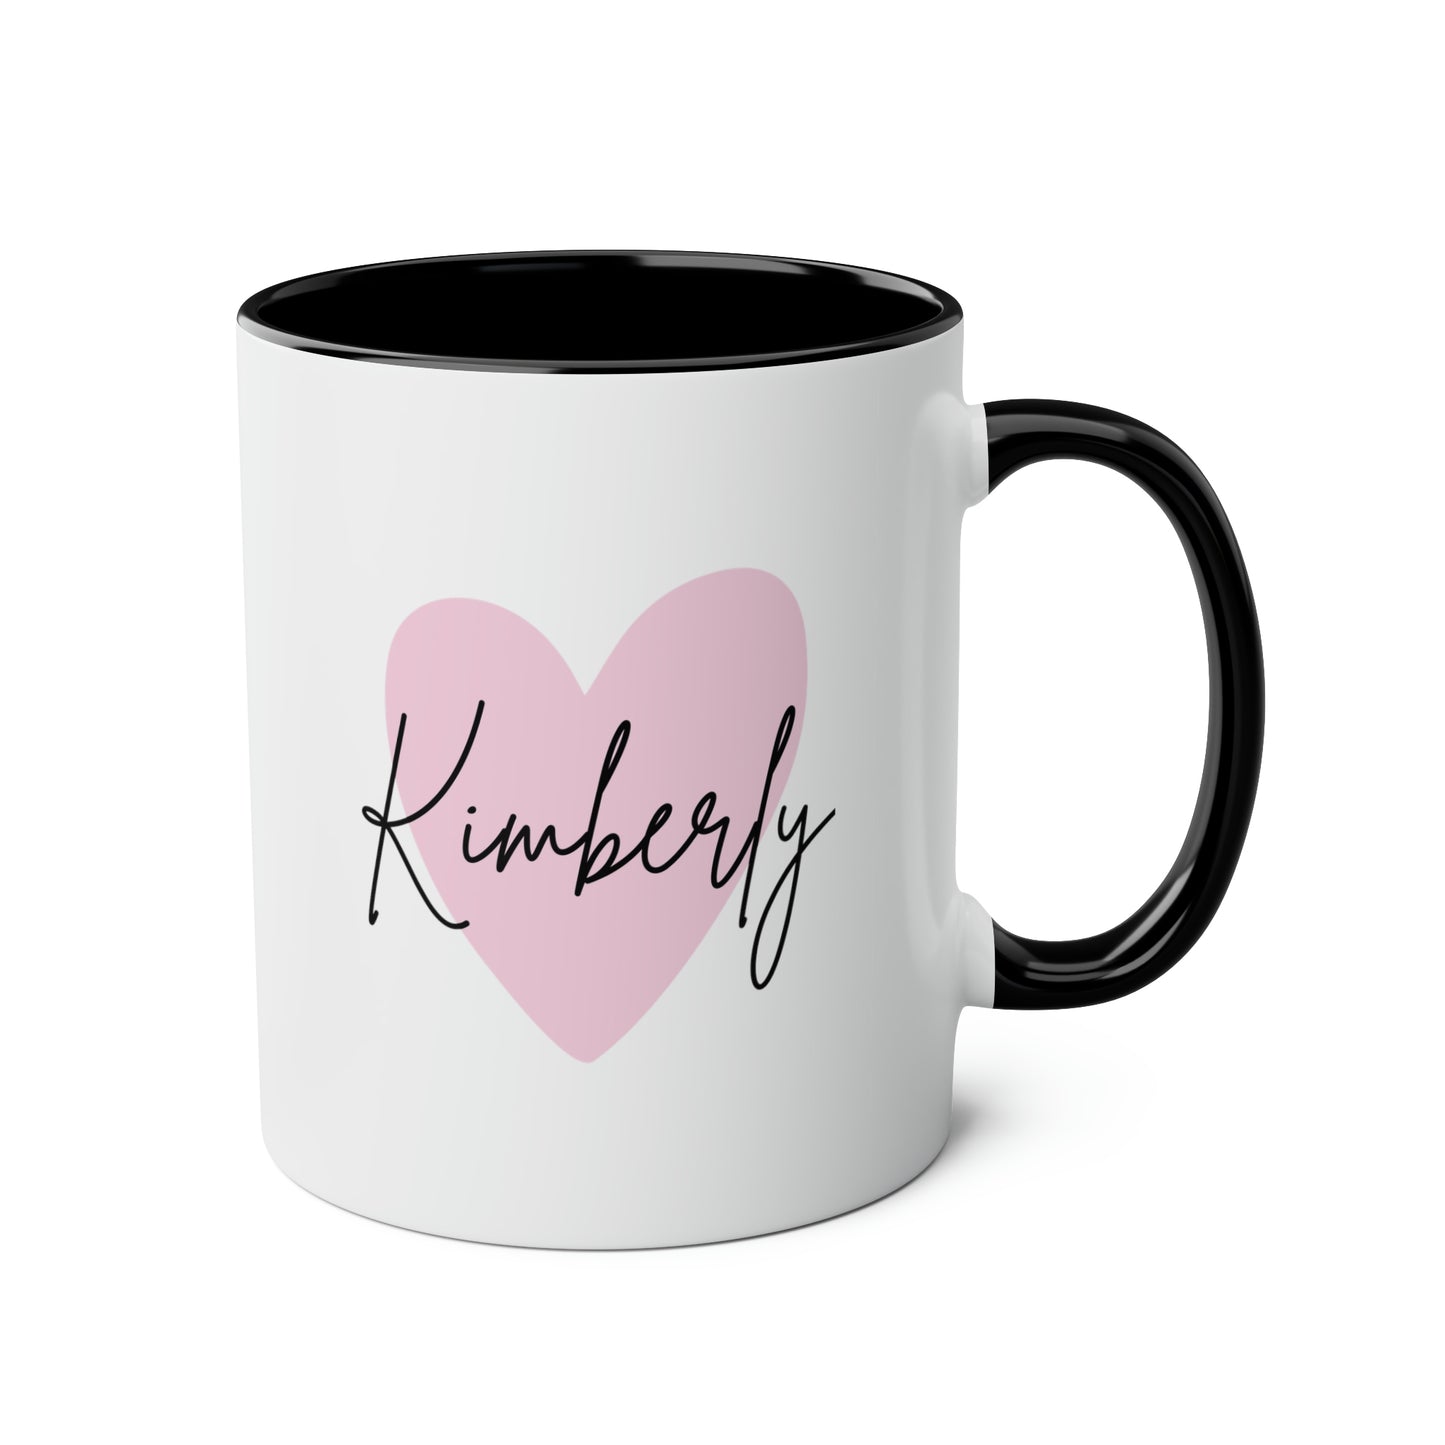 Name 11oz white with black accent funny large coffee mug gift for her mom grandma friend heart custom customized personalized waveywares wavey wares wavywares wavy wares